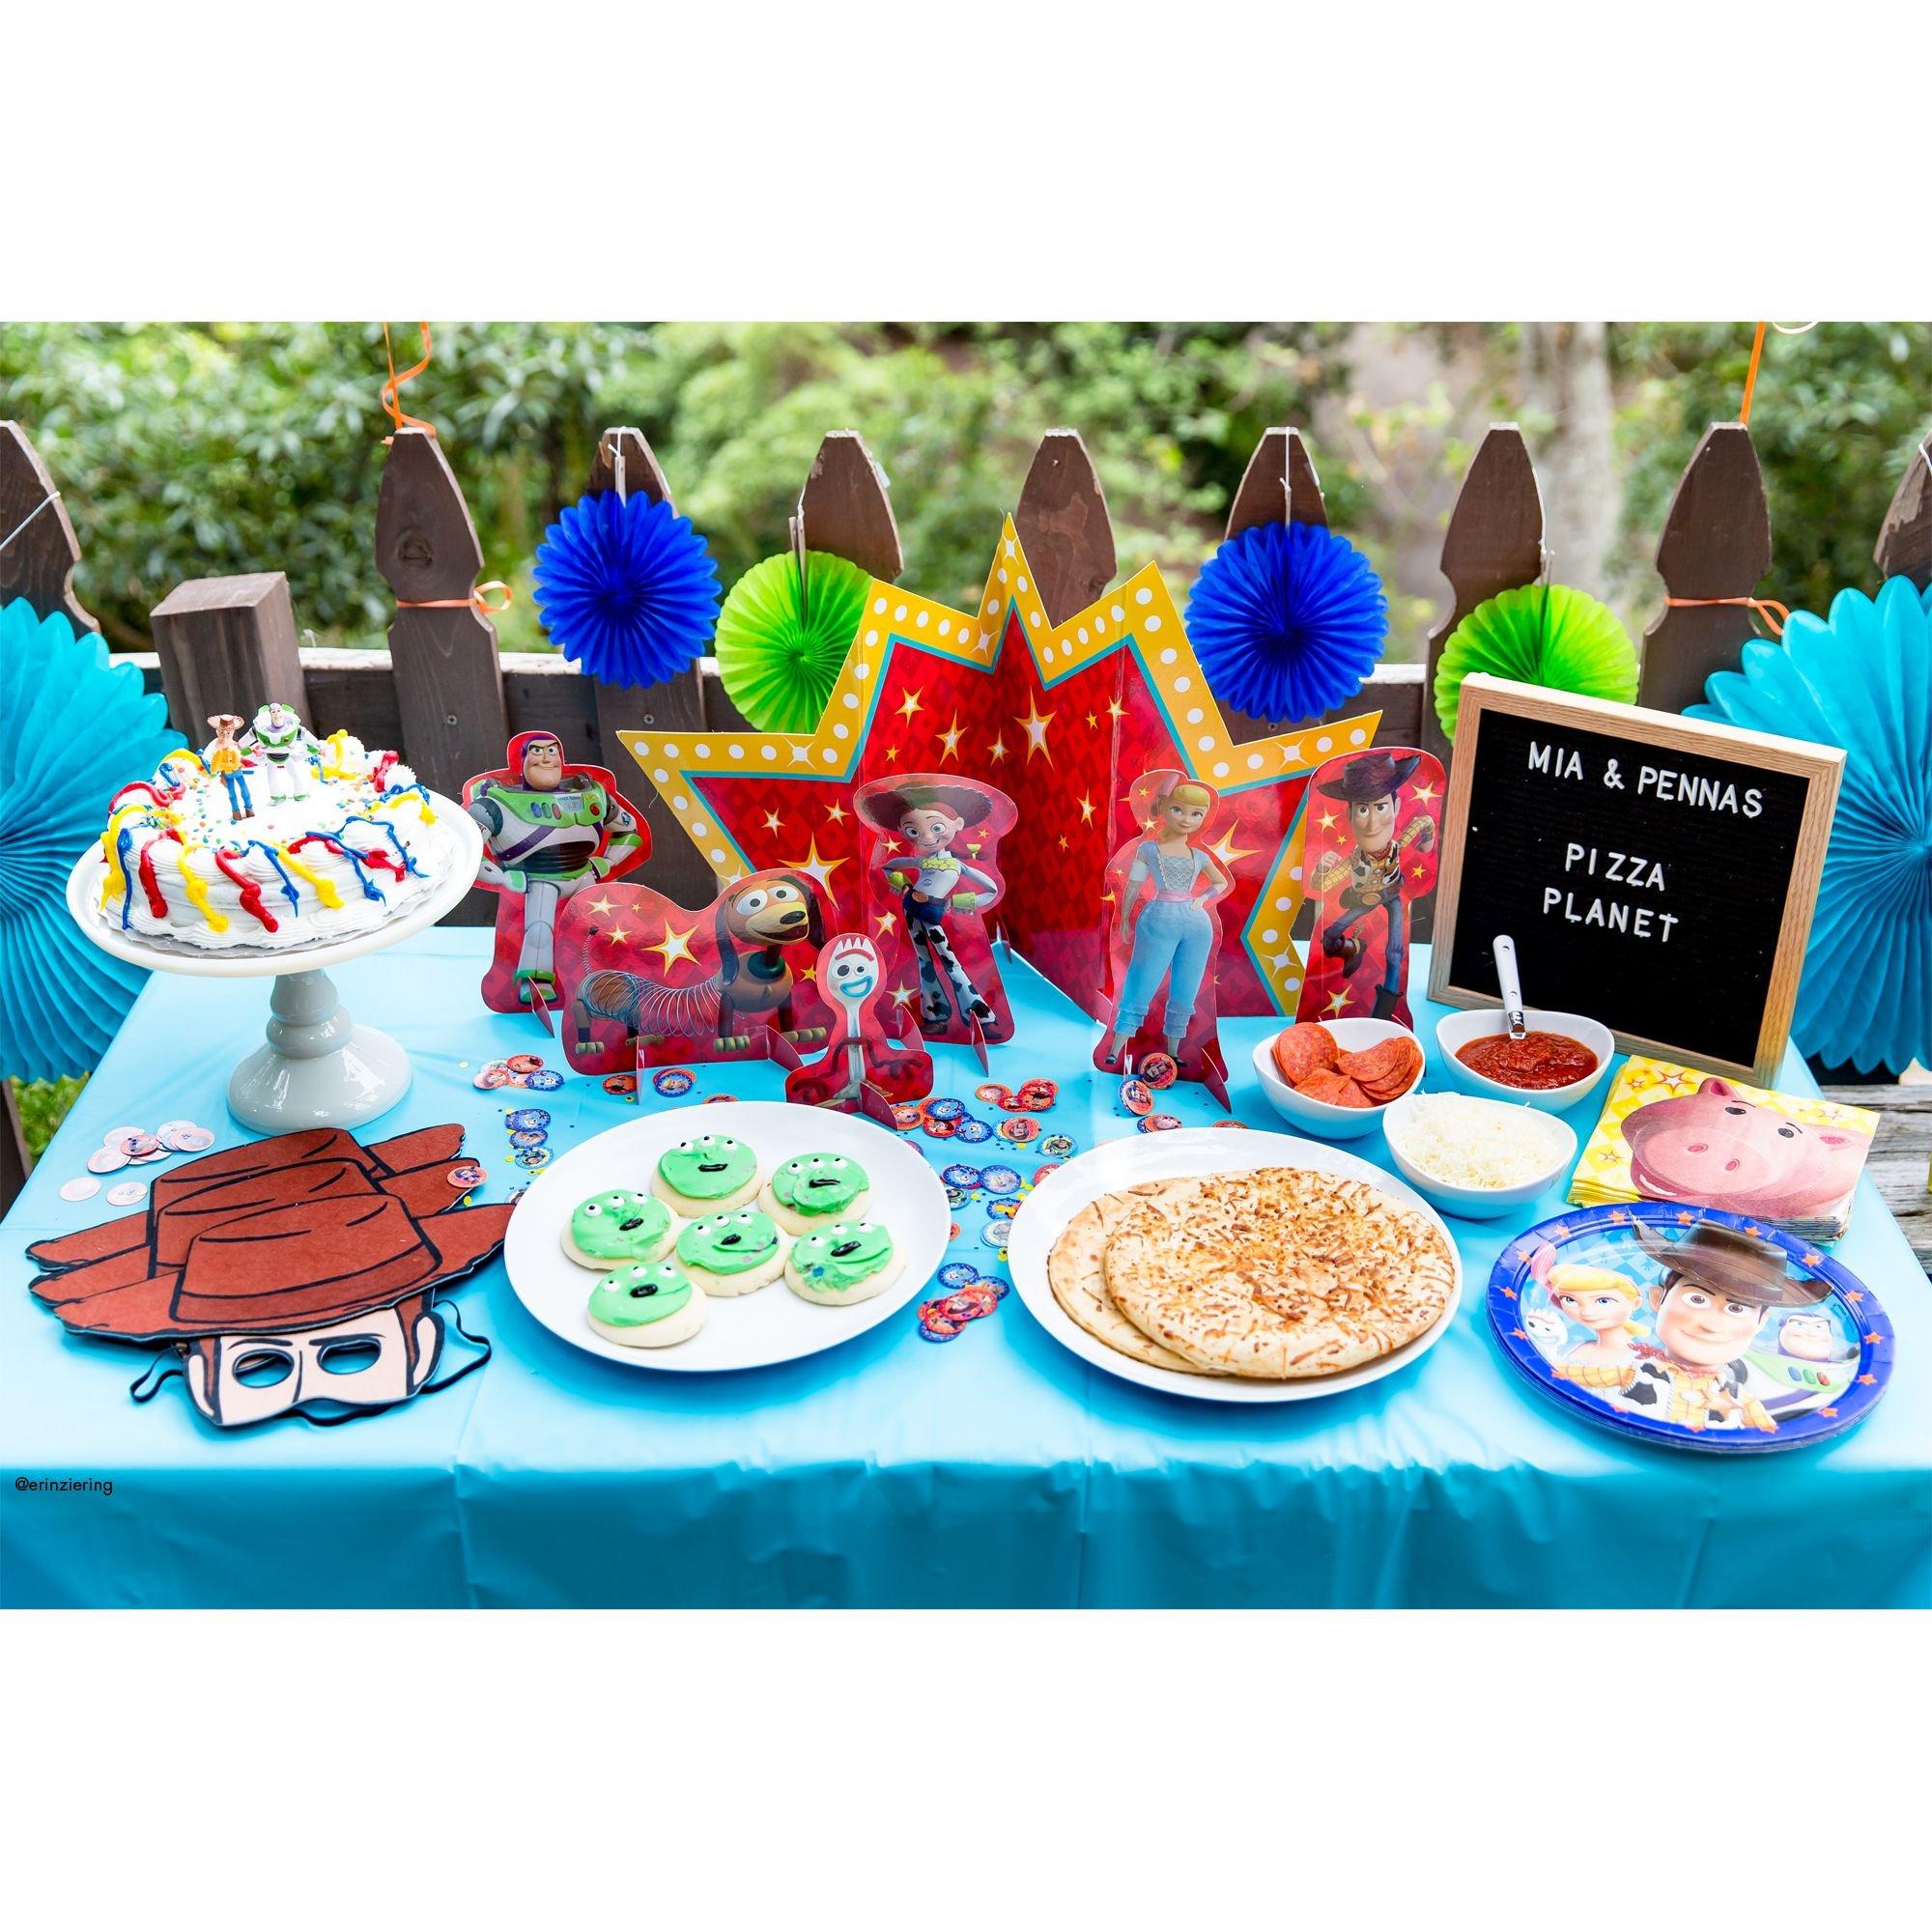 Toy Story Party Decorations, Join Forky Toy Story 4 Birthday Decor,  Tablecloth, Tableware of Napkins, Plates, Cups, Centerpieces, Banner, Buzz  